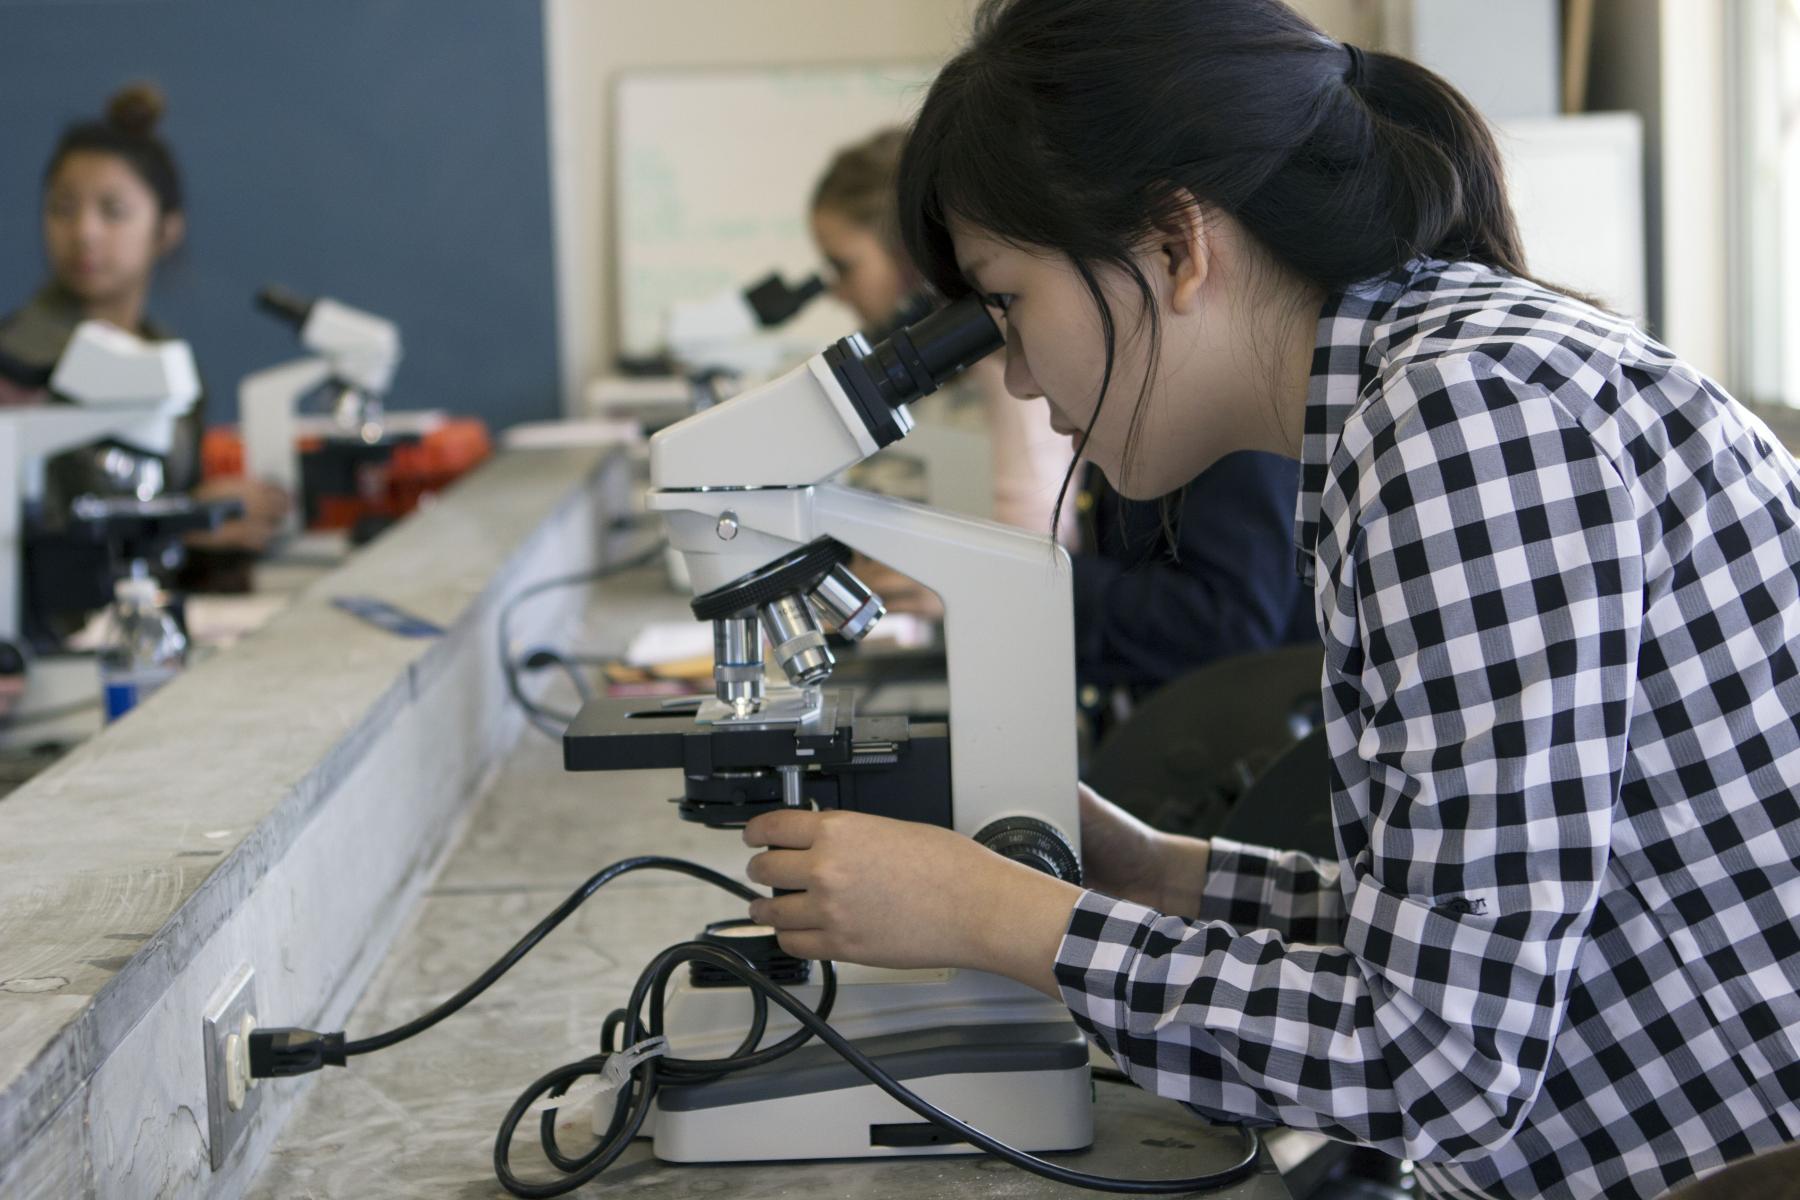 A student looking through microscope